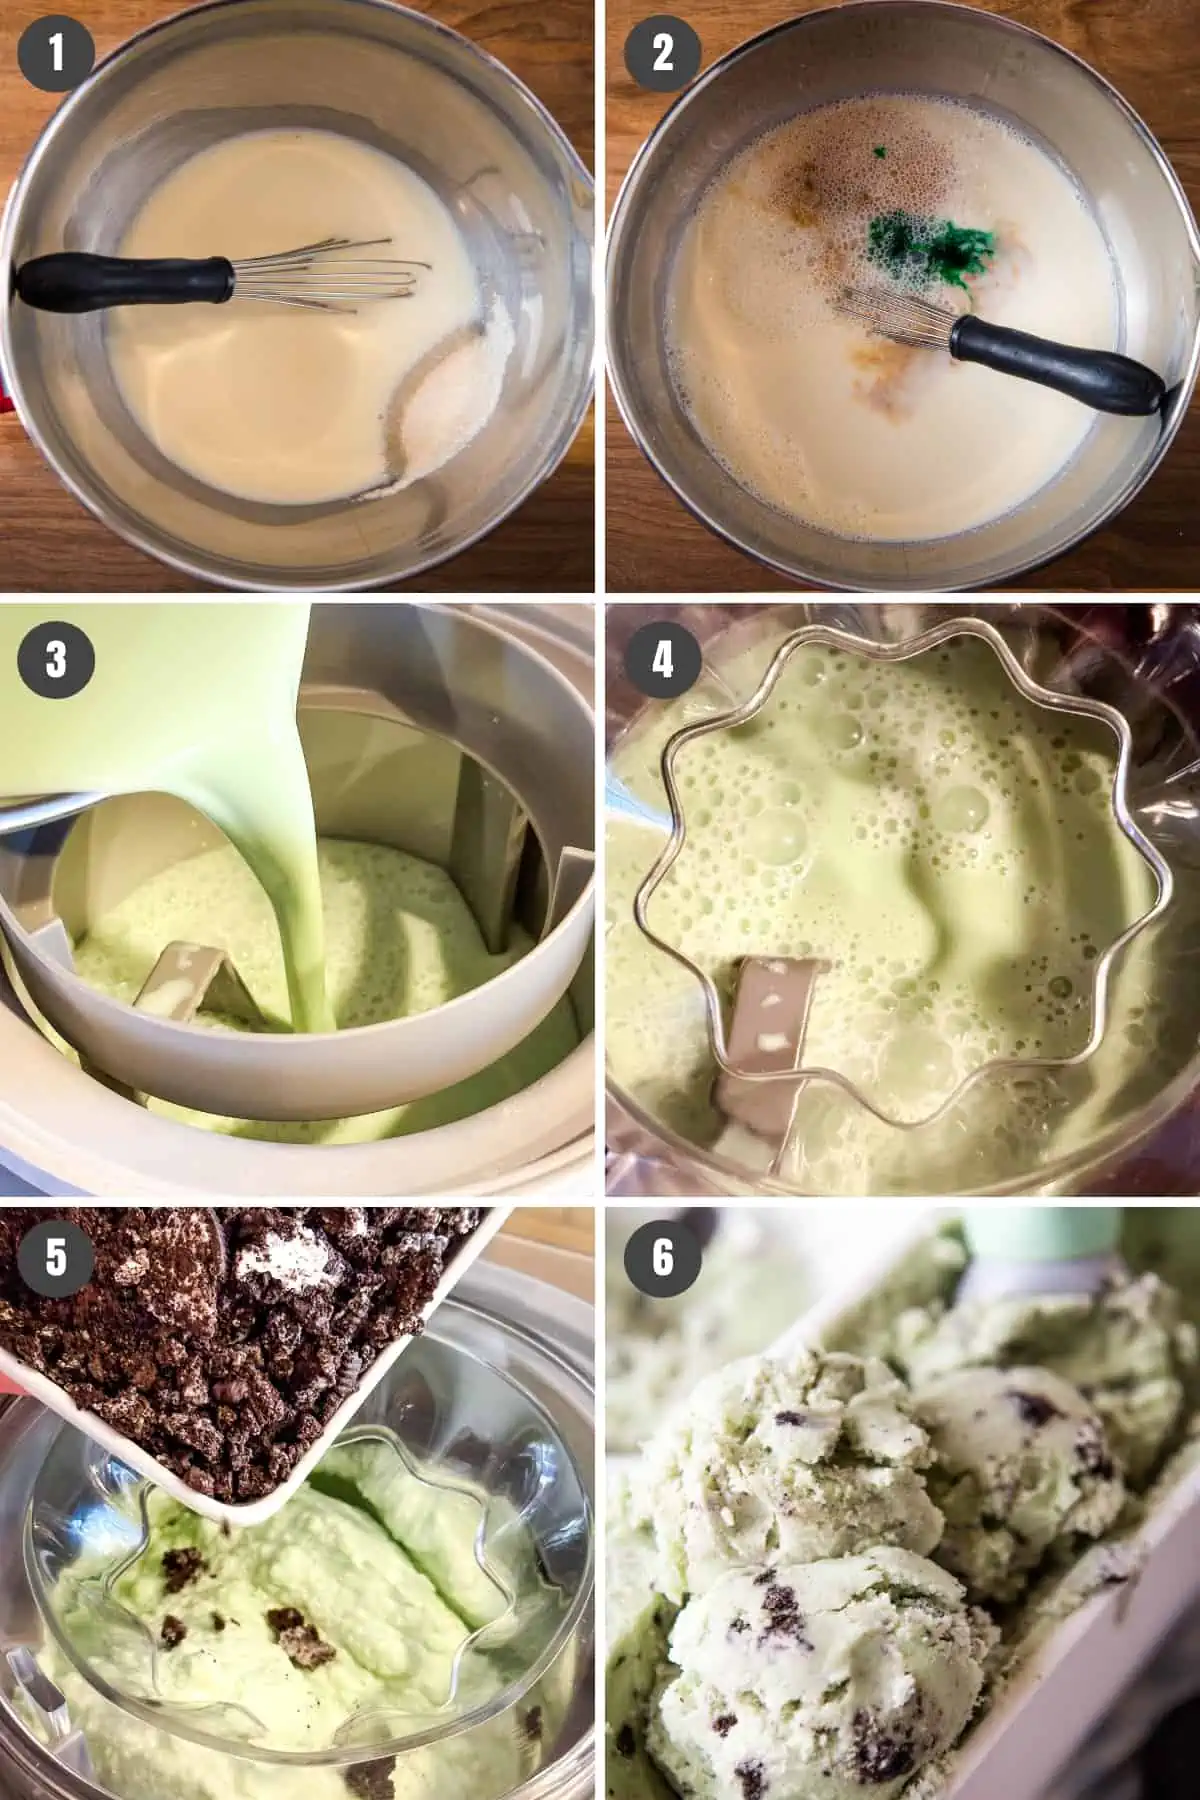 6 steps for how to make mint Oreo ice cream, including mixing and freezing in ice cream maker